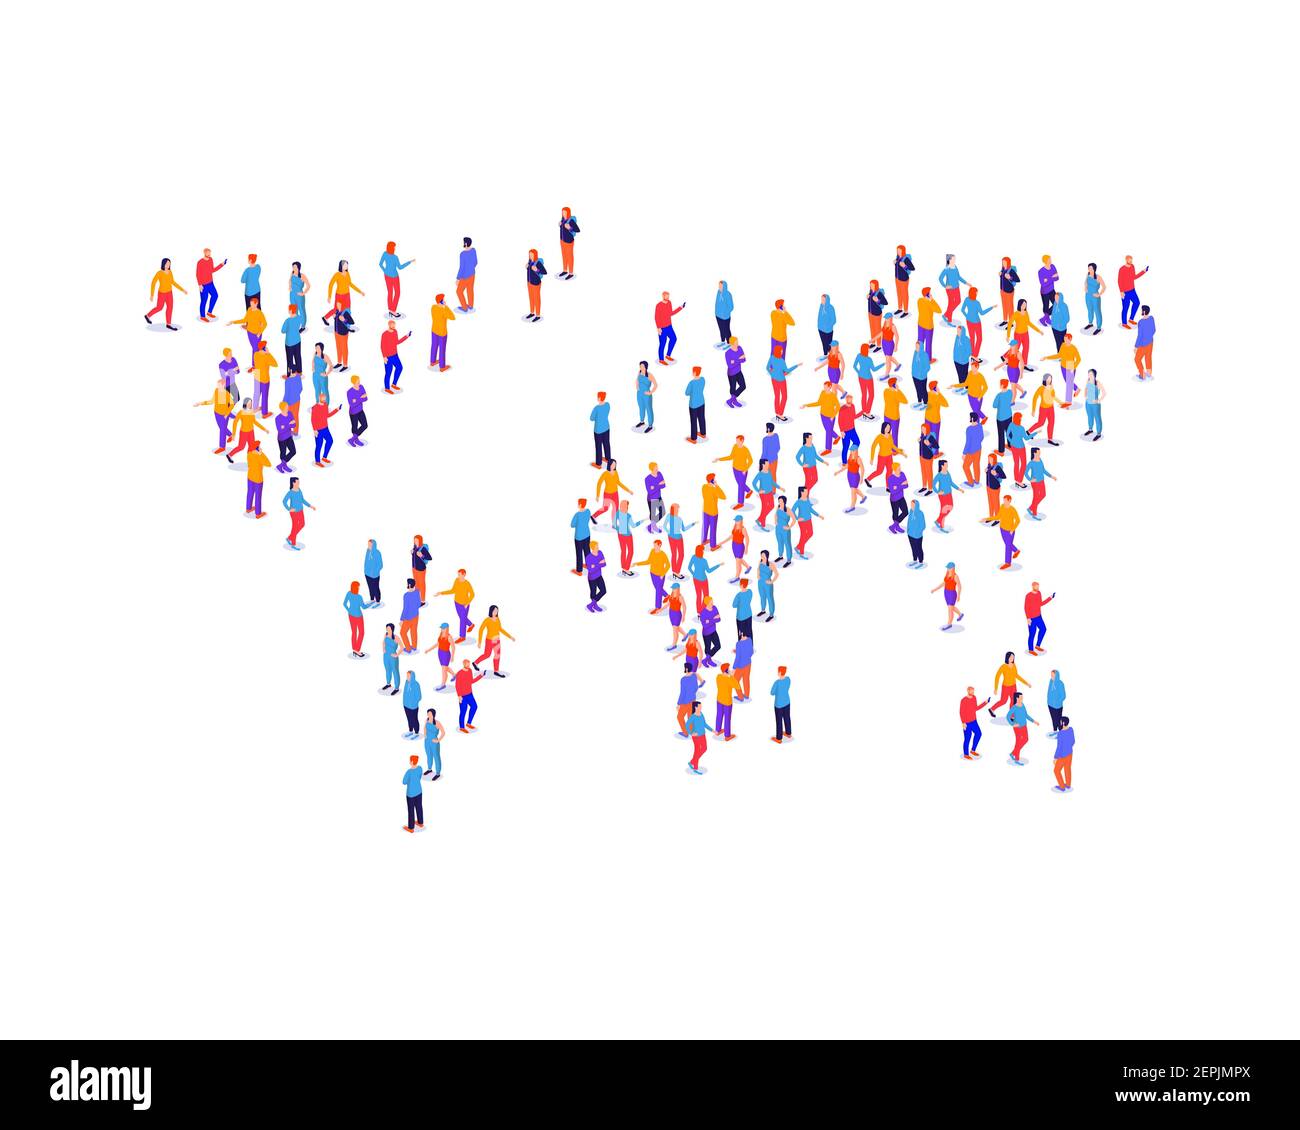 Crowd people in shape earth map isometric illustration. Groups characters lined up with world continents analysis human population. Stock Vector